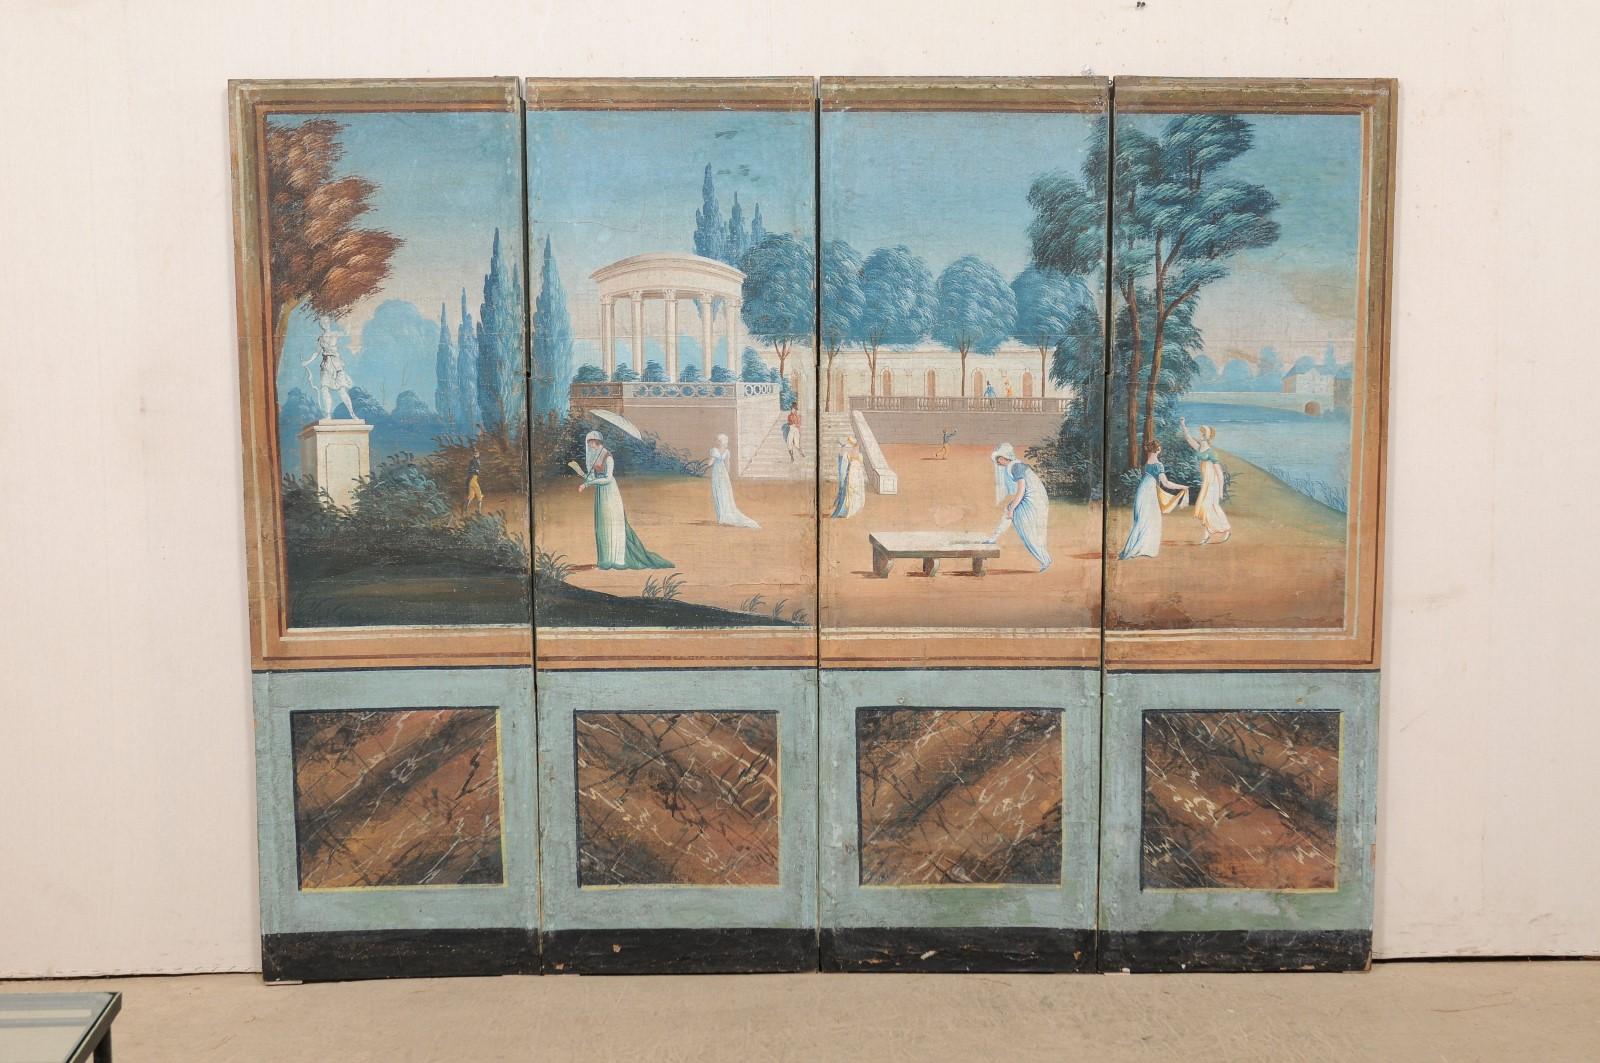 A French painted folding screen room divider from the 19th century. This antique accordion style folding screen from France features four tall rectangular panels, each approximately 5.75 feet in height, whose front sides are adorned with paper